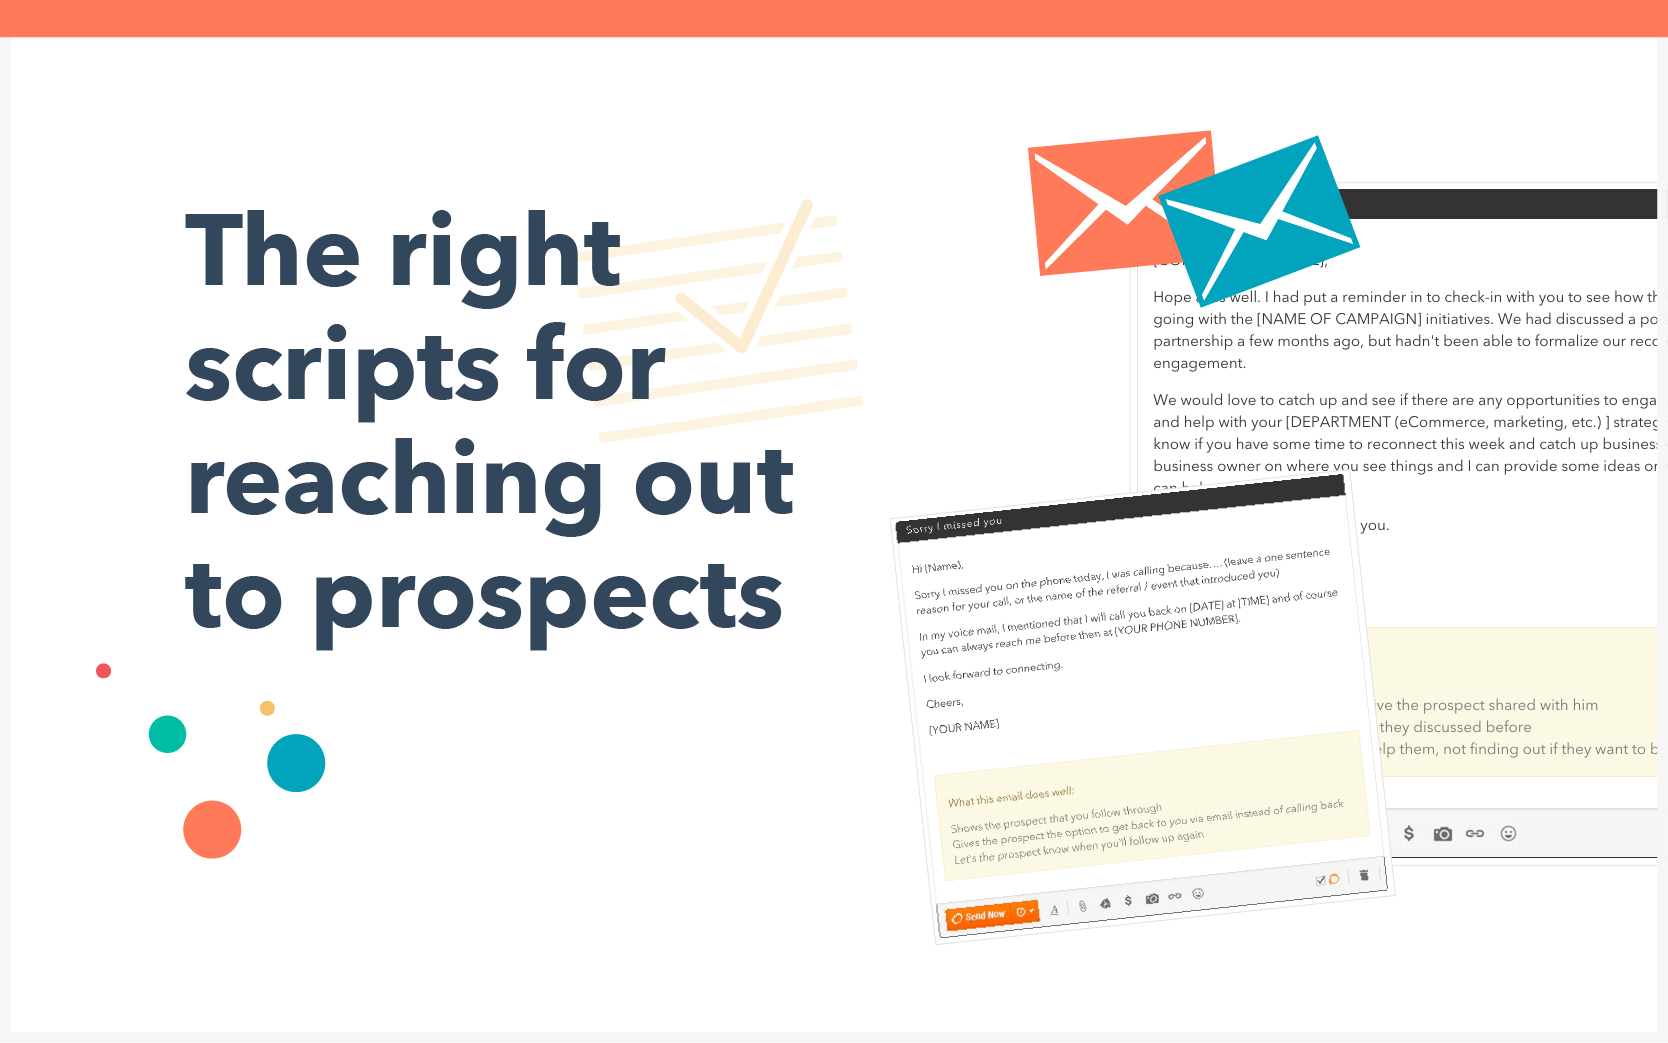 The right scripts for reaching out to prospects